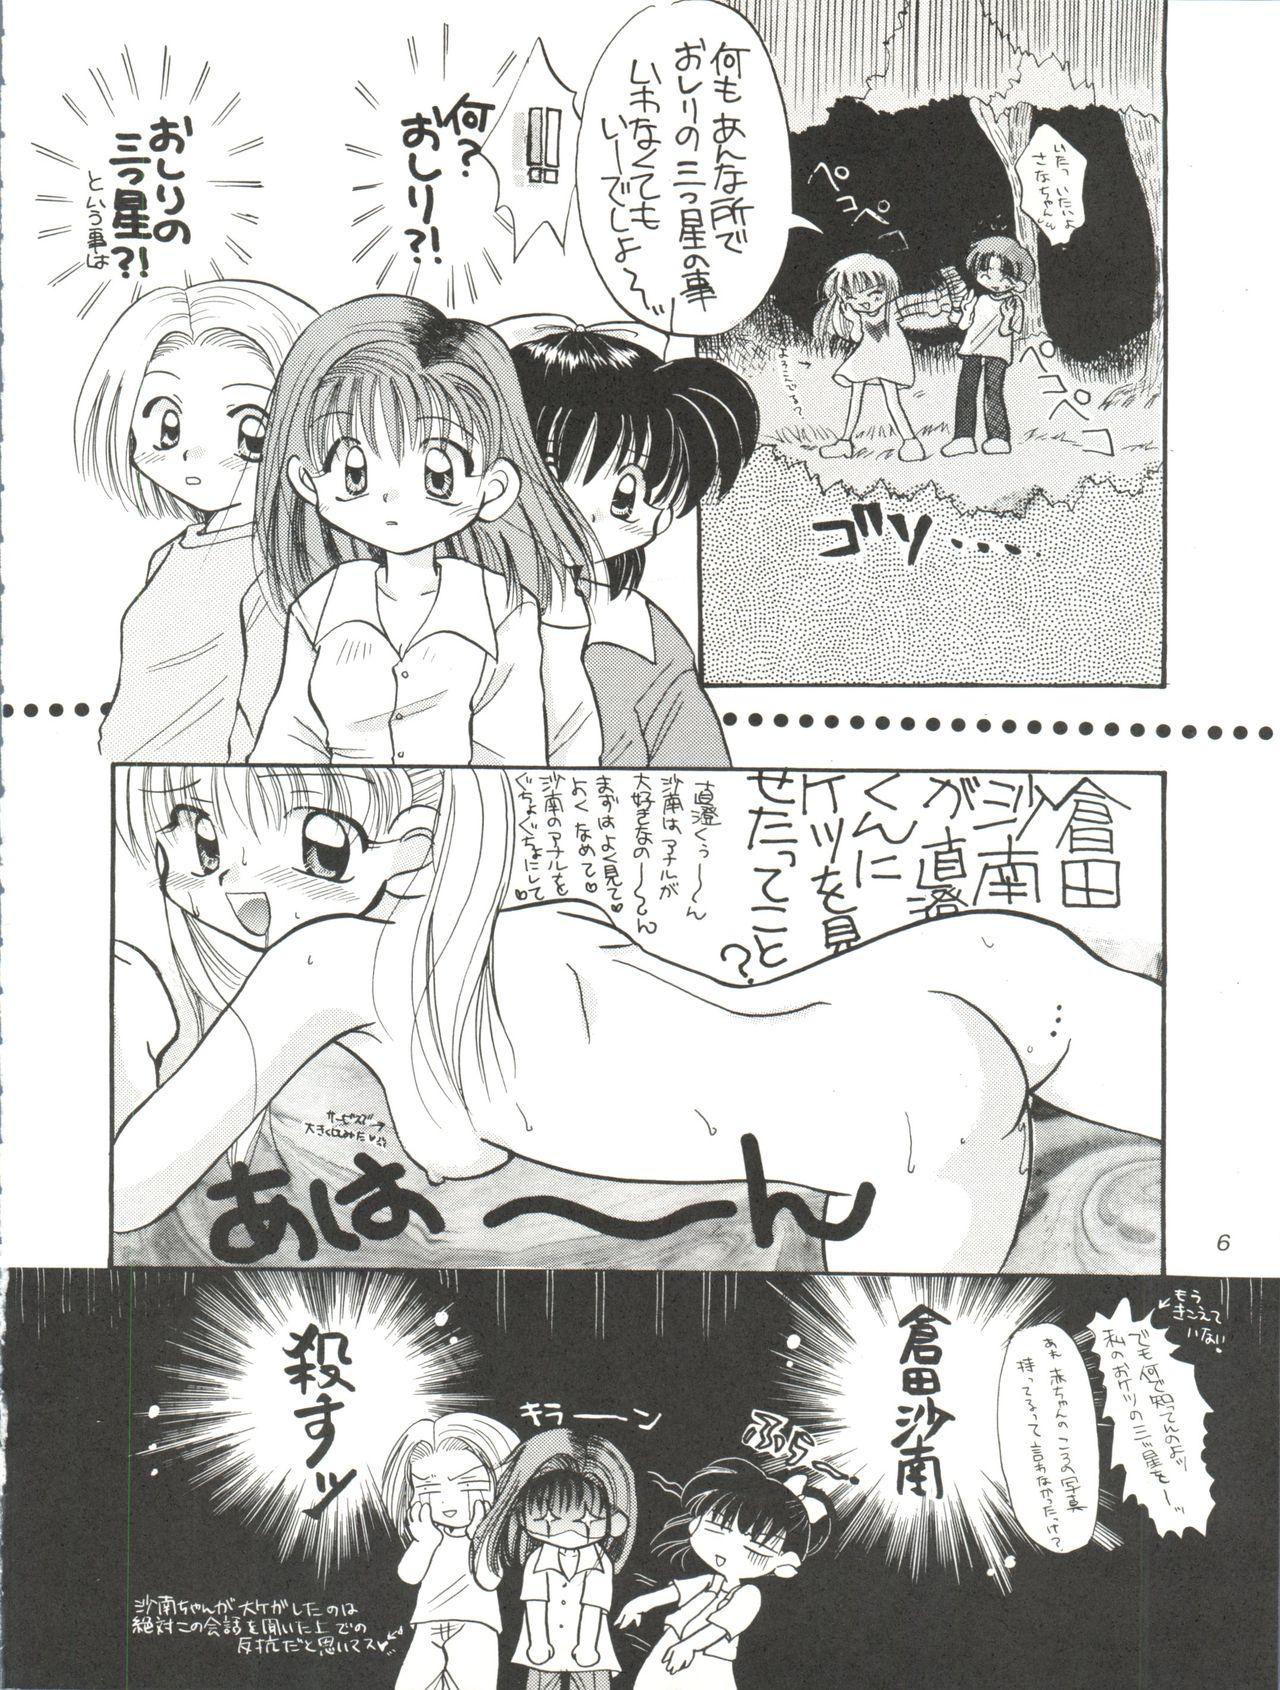 Hogtied Lovely Baby - Kodomo no omocha Workout - Page 6